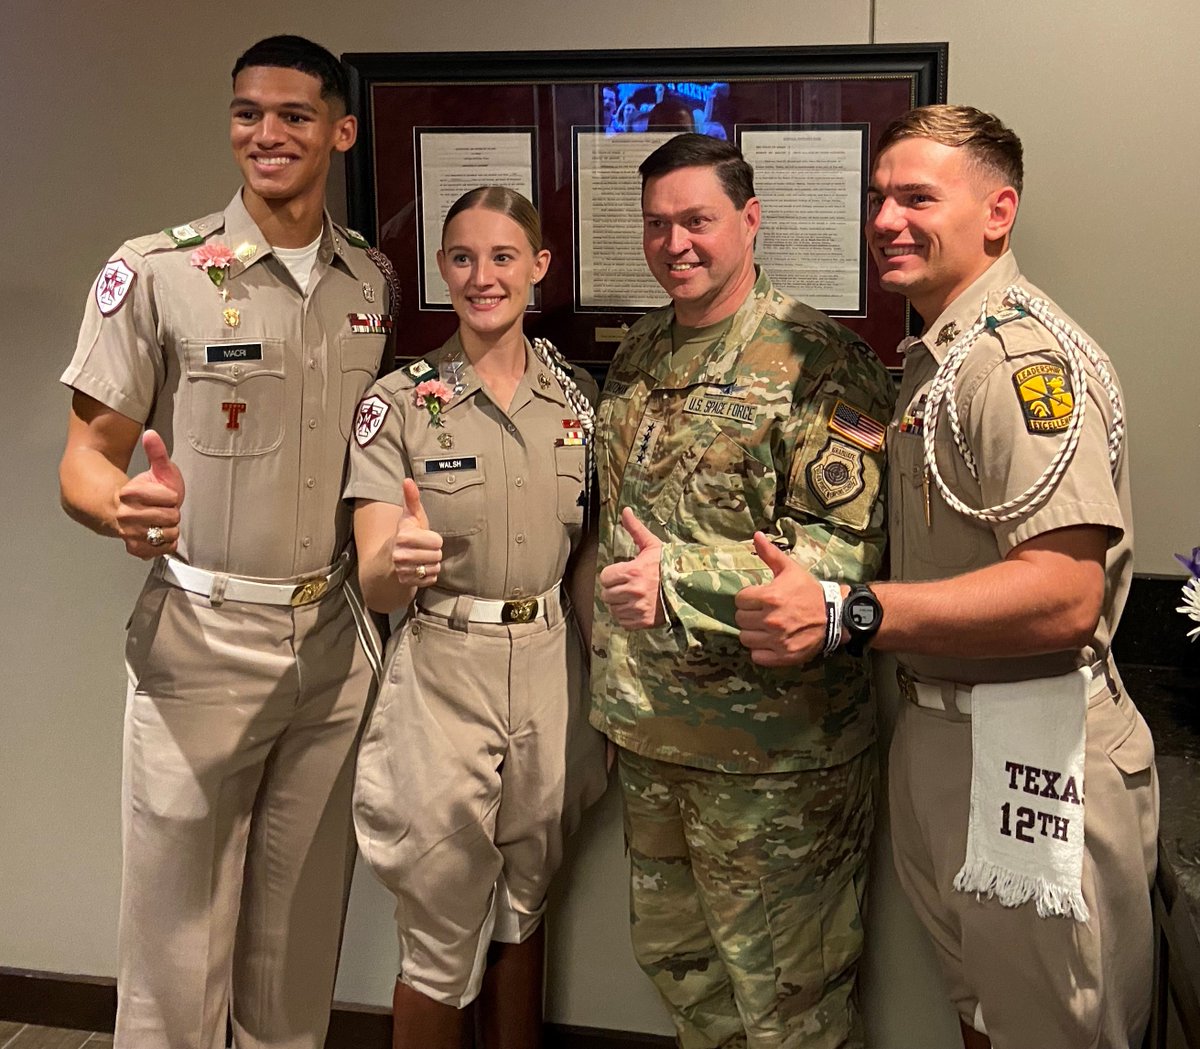 Honored to support @SpaceForceDoD @SpaceForceCSO during their visit to #Aggieland last week.  Appreciate the opportunity to showcase what @tamusystem, @relliscampus, @TAMUEngineering, @BushSchool and @AggieCorps are doing for the future of our nation.  #SempurSupra #PartnertoWin